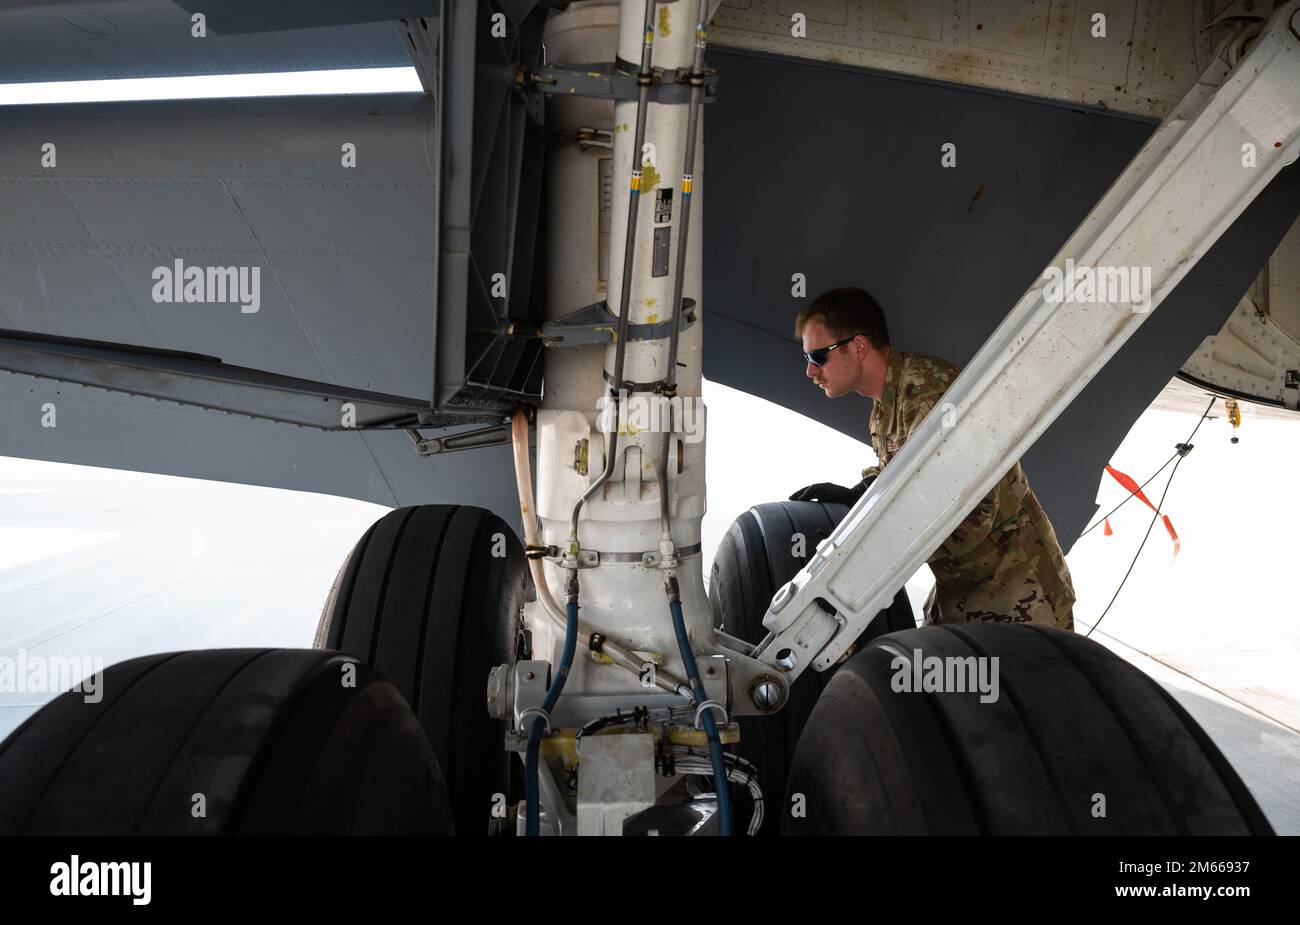 U.S. Air Force Maj. Thomas Evans, a KC-135 Stratotanker aircraft pilot assigned to 340th Expeditionary Air Refueling Squadron, inspects the outside of a U.S. Air Force KC-135 Stratotanker assigned to the 340th EARS before flight operations at Al Udeid Air Base, Qatar, April 6, 2022. The 340th EARS deployed with the Ninth Air Force (Air Forces Central), is responsible for delivering fuel to U.S. and partner nation forces, enabling airpower, deterrence, and stability. Stock Photo